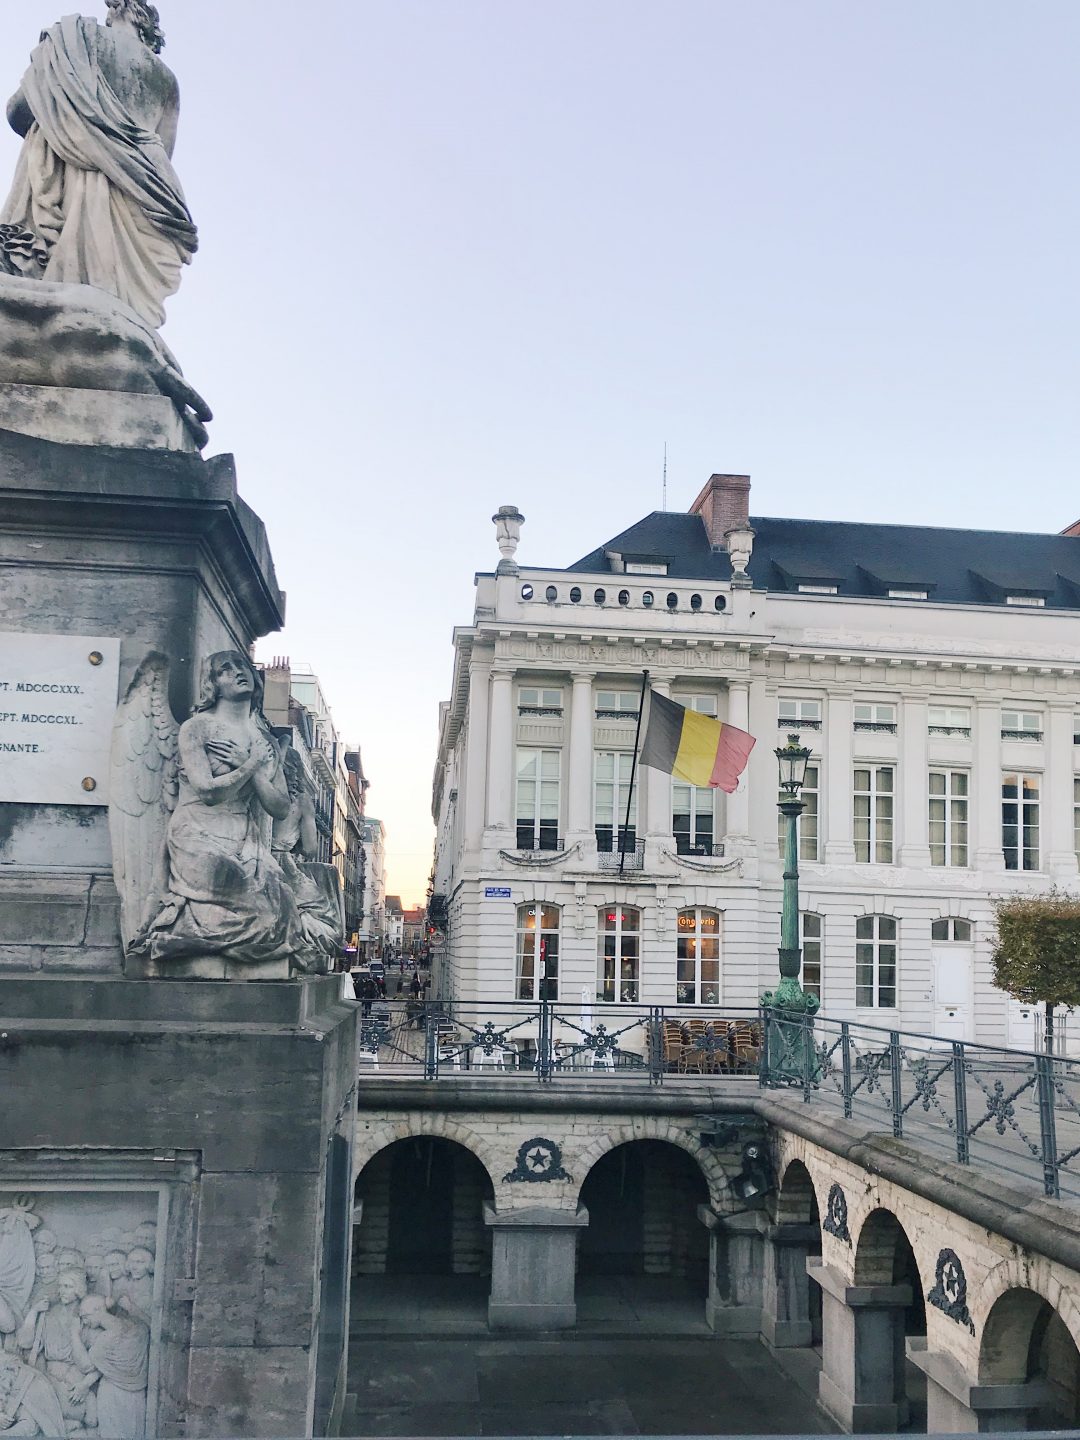 48 Hours in Brussels.